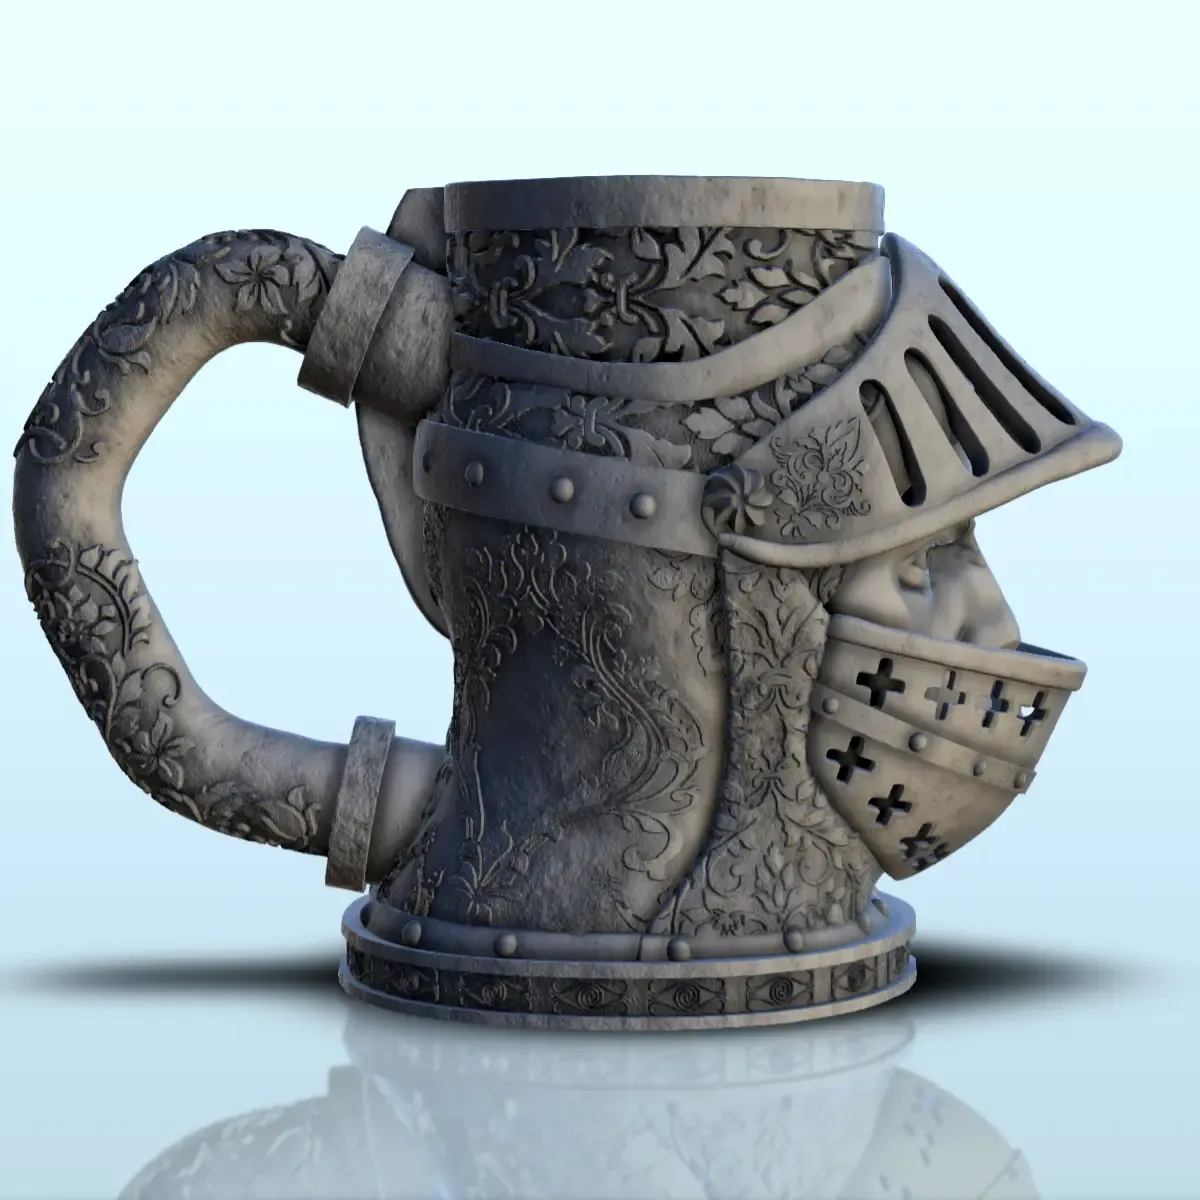 Knight in armour dice mug (14) - beer can holder